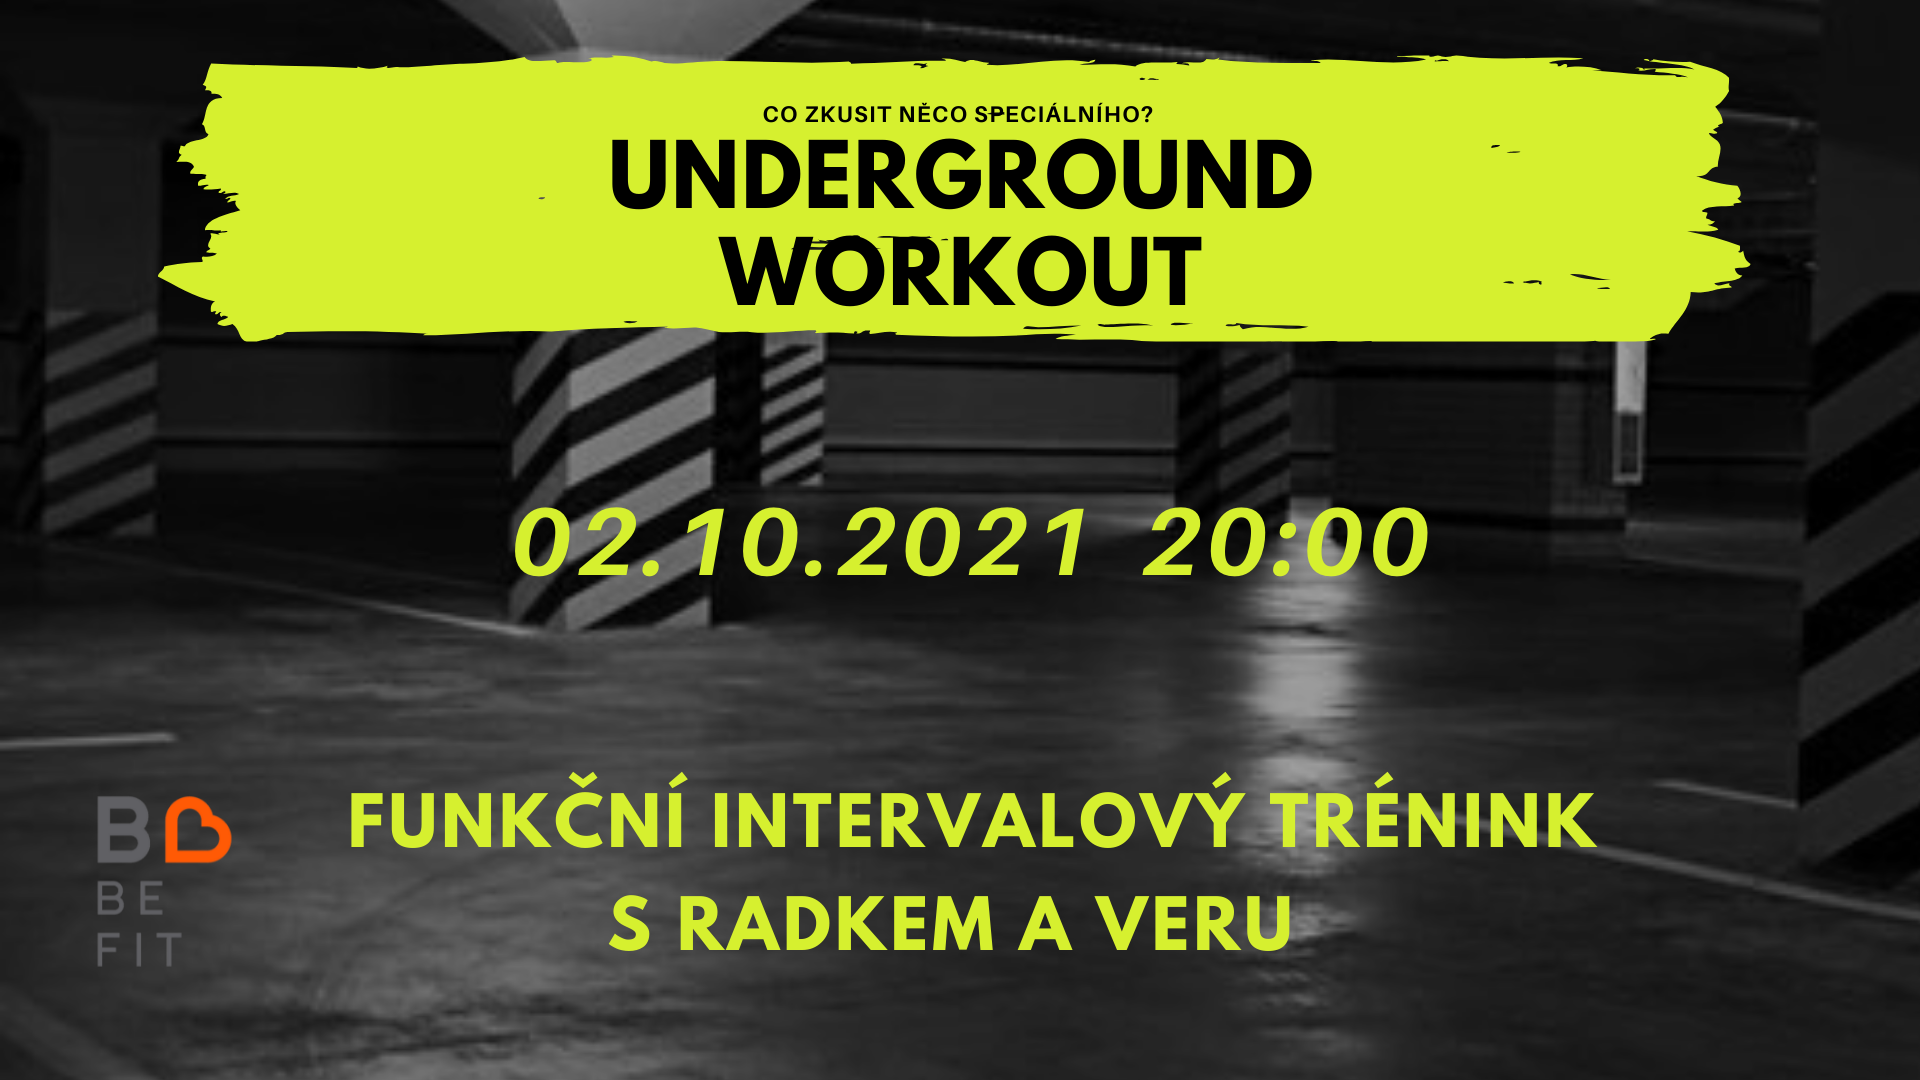 You are currently viewing UNDERGROUND WORKOUT